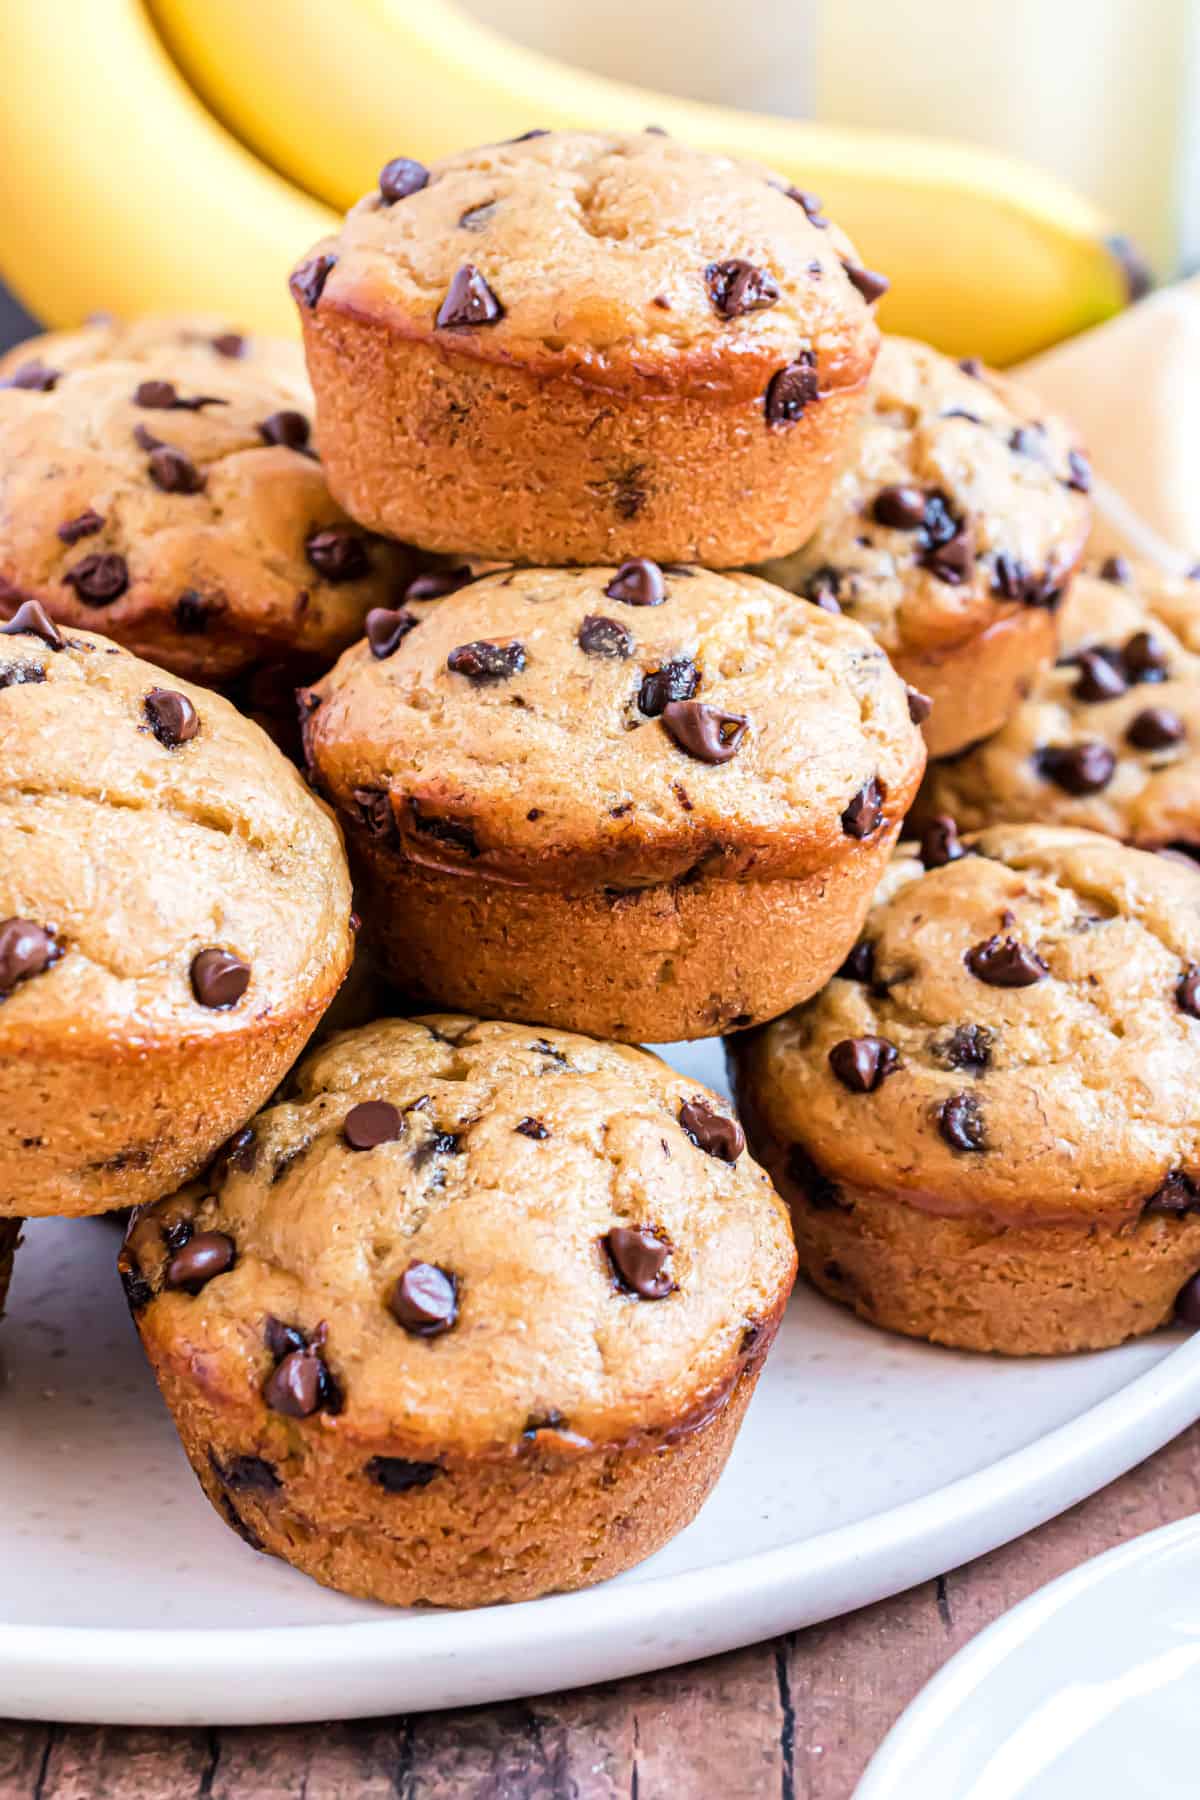 Stack of banana chocolate chip muffins on a plate.